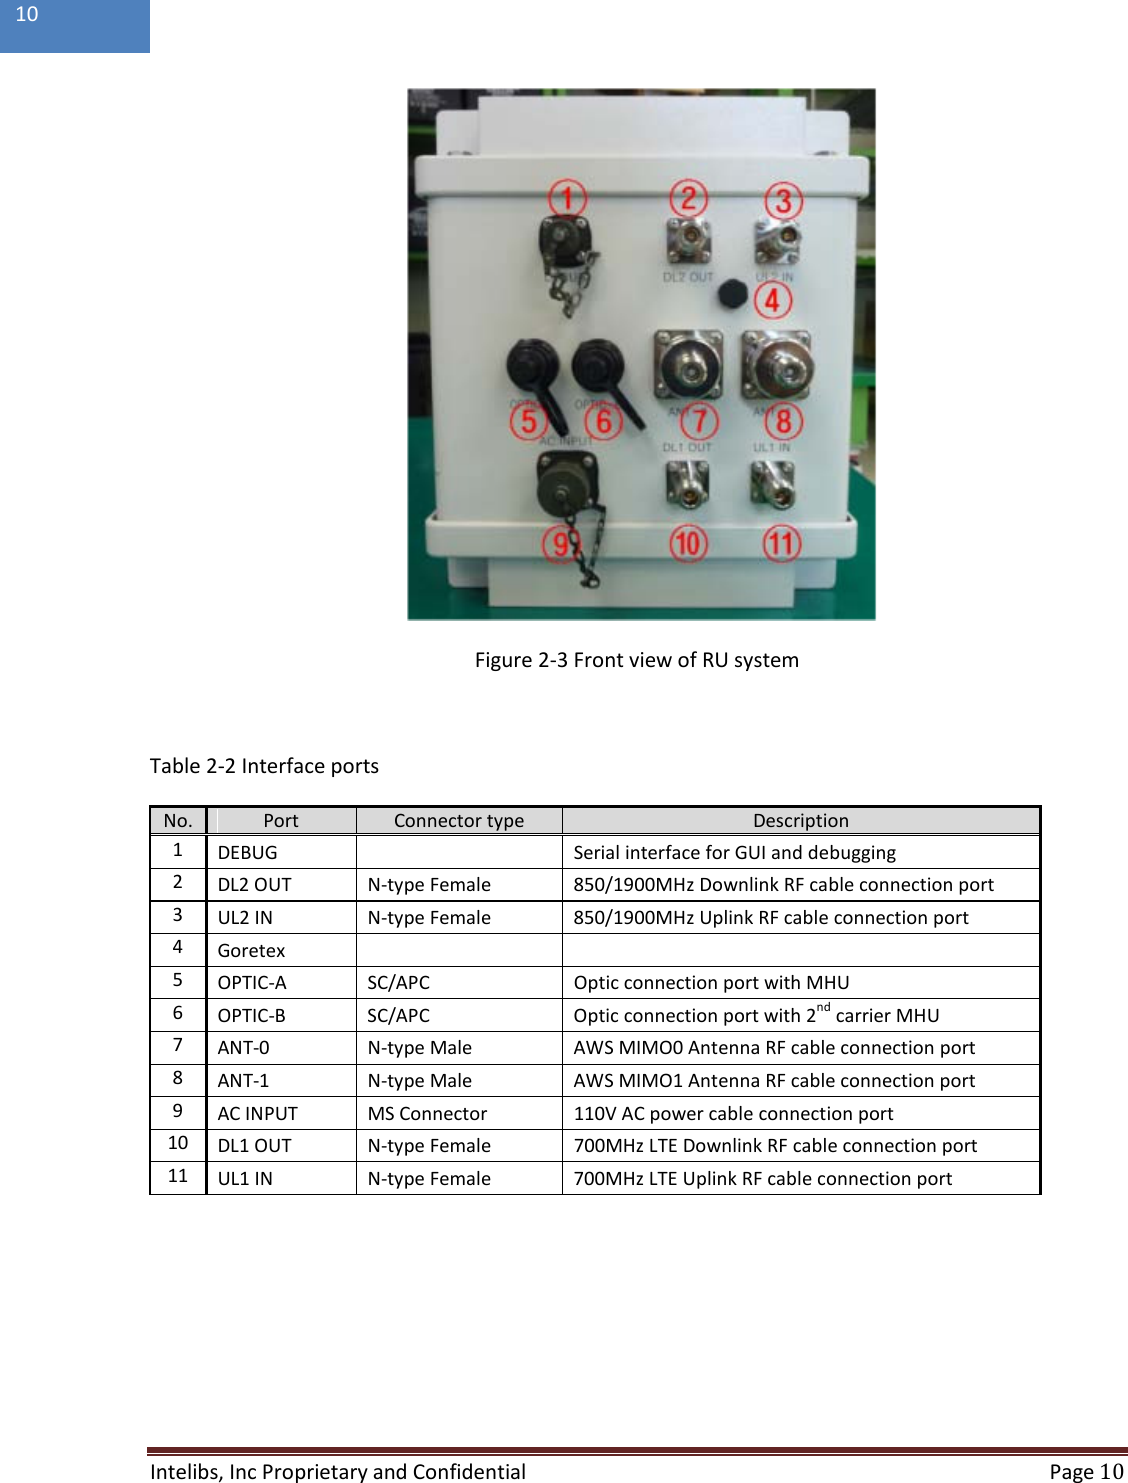  Intelibs, Inc Proprietary and Confidential  Page 10  10                        Figure 2-3 Front view of RU system  Table 2-2 Interface ports      No. Port Connector type Description 1 DEBUG  Serial interface for GUI and debugging 2 DL2 OUT N-type Female 850/1900MHz Downlink RF cable connection port 3 UL2 IN N-type Female 850/1900MHz Uplink RF cable connection port 4 Goretex    5  OPTIC-A  SC/APC Optic connection port with MHU 6 OPTIC-B SC/APC Optic connection port with 2nd carrier MHU 7 ANT-0 N-type Male AWS MIMO0 Antenna RF cable connection port 8 ANT-1 N-type Male AWS MIMO1 Antenna RF cable connection port 9 AC INPUT MS Connector 110V AC power cable connection port 10 DL1 OUT N-type Female 700MHz LTE Downlink RF cable connection port 11 UL1 IN N-type Female 700MHz LTE Uplink RF cable connection port 